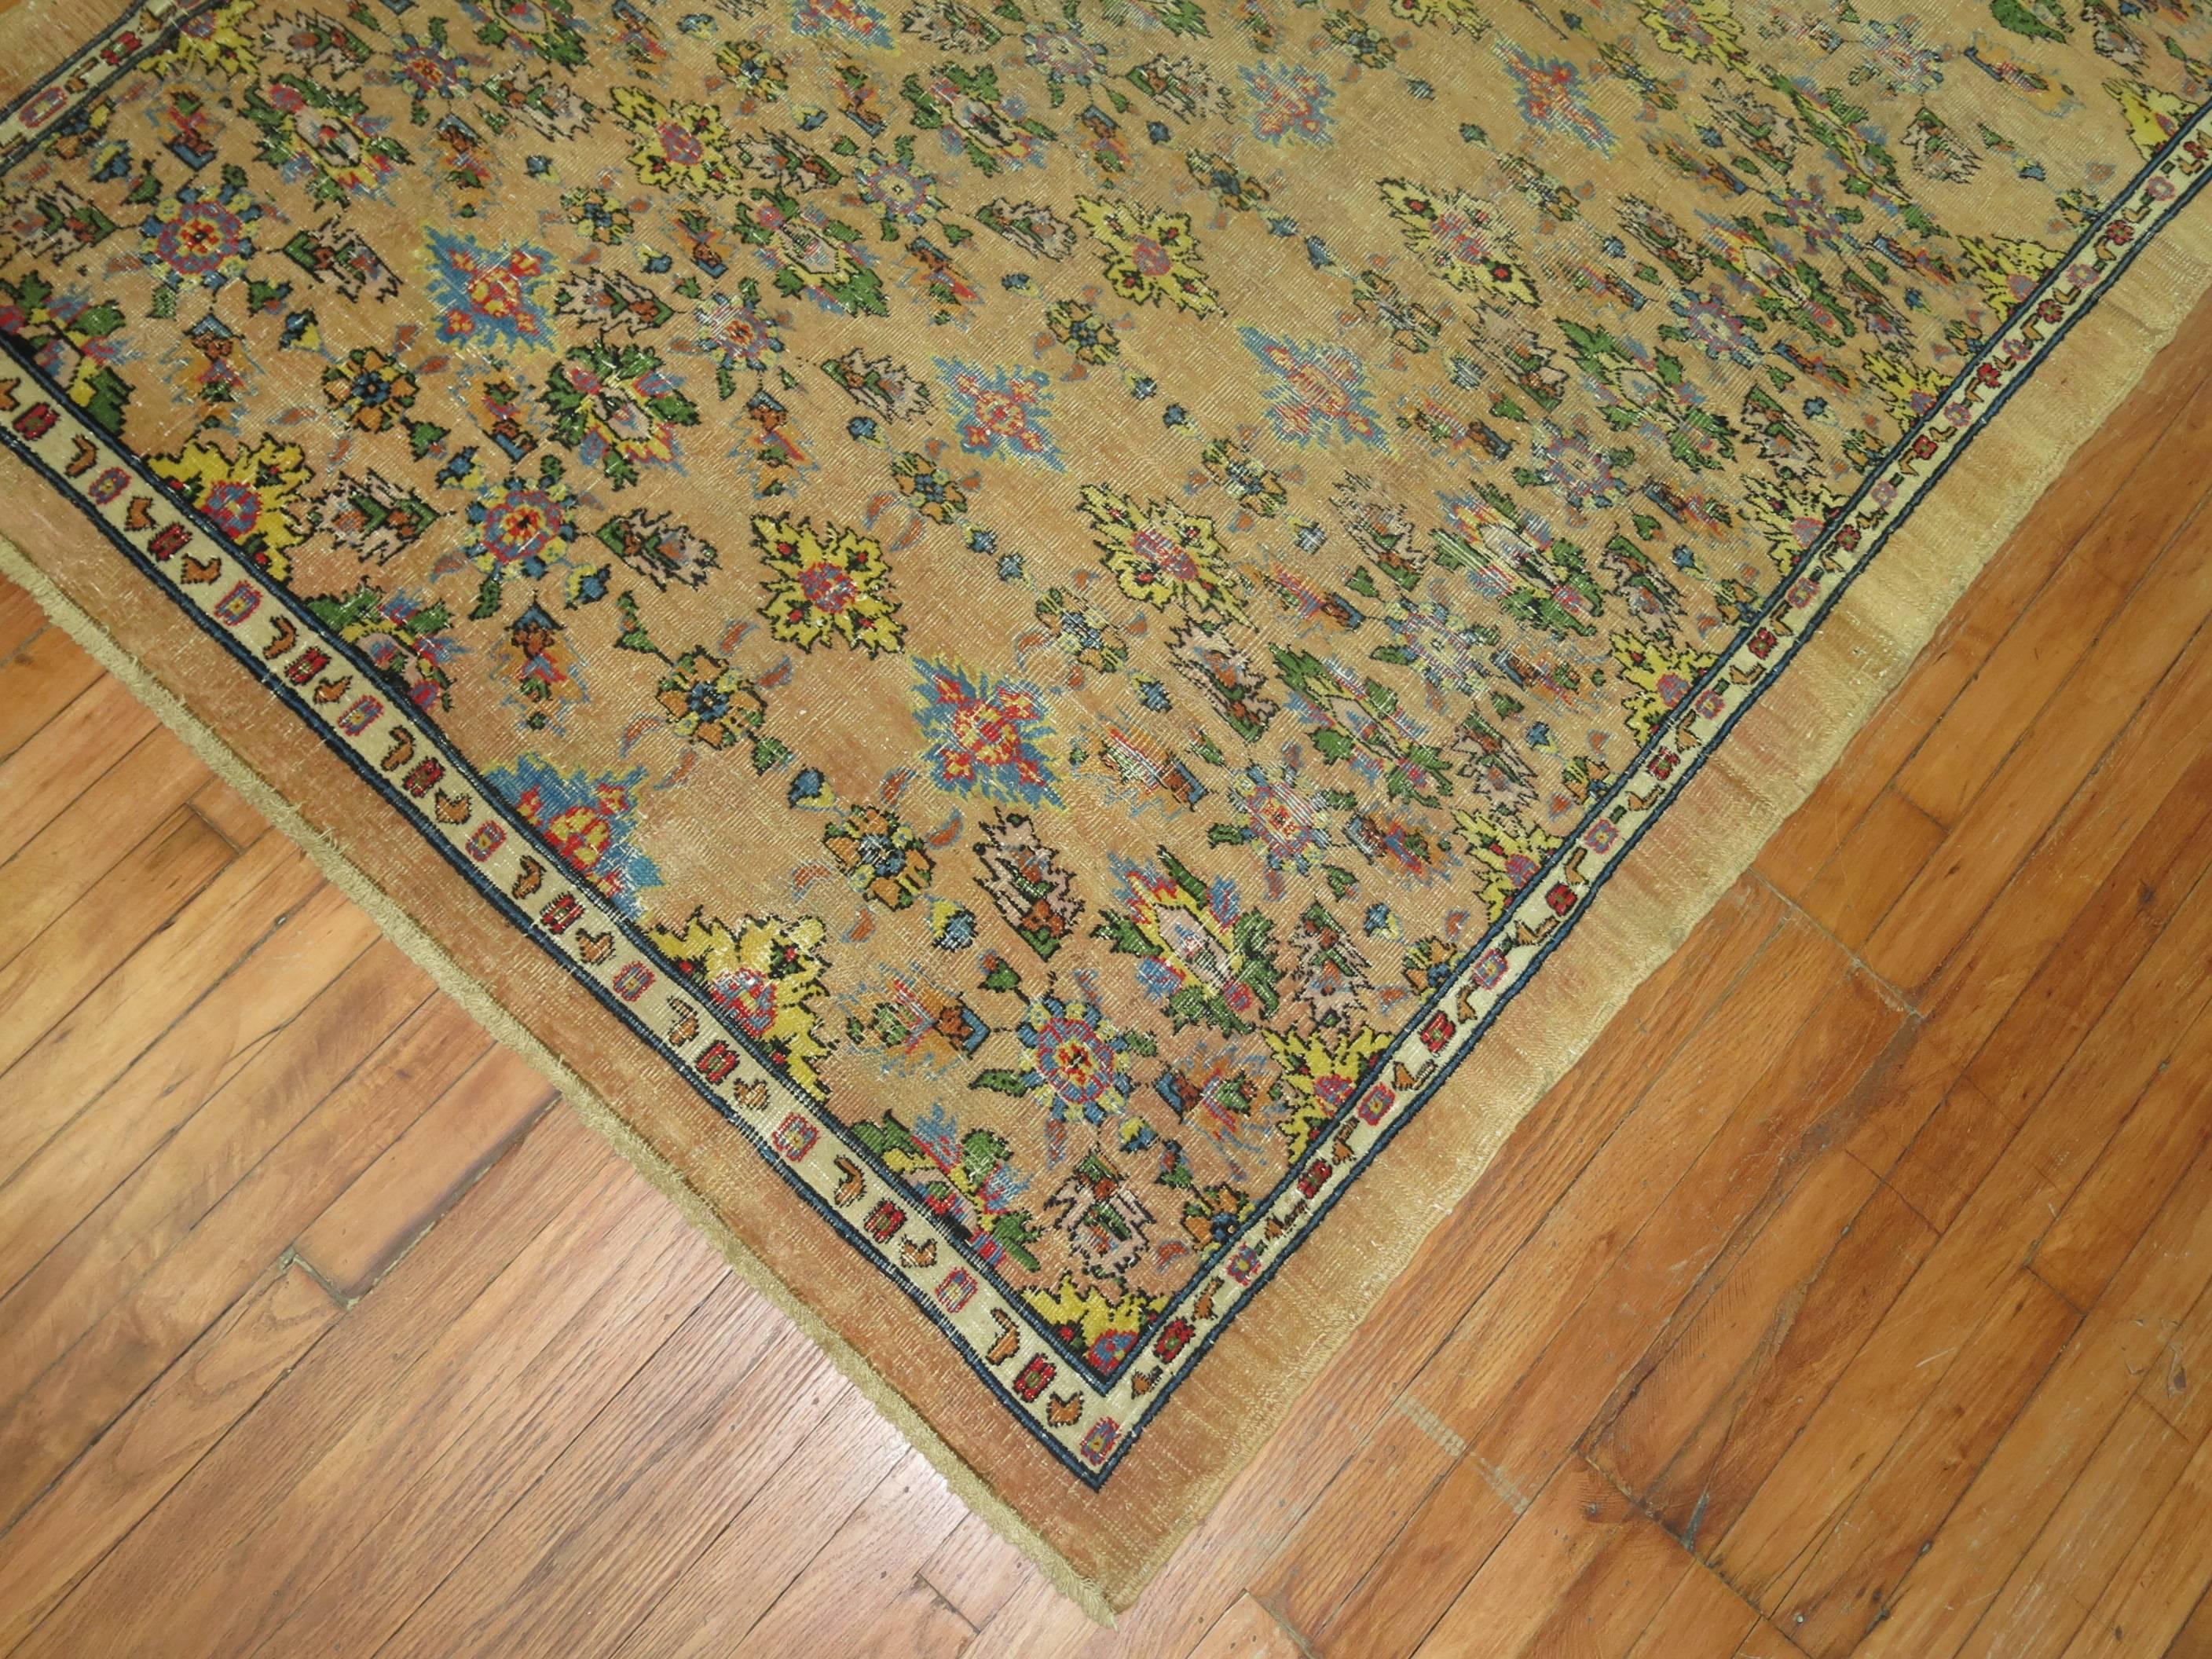 Persian Mahal square size carpet with an eloquent and colorful all-over design on a flesh colored field,

circa 1940, measures: 5' x 6'2